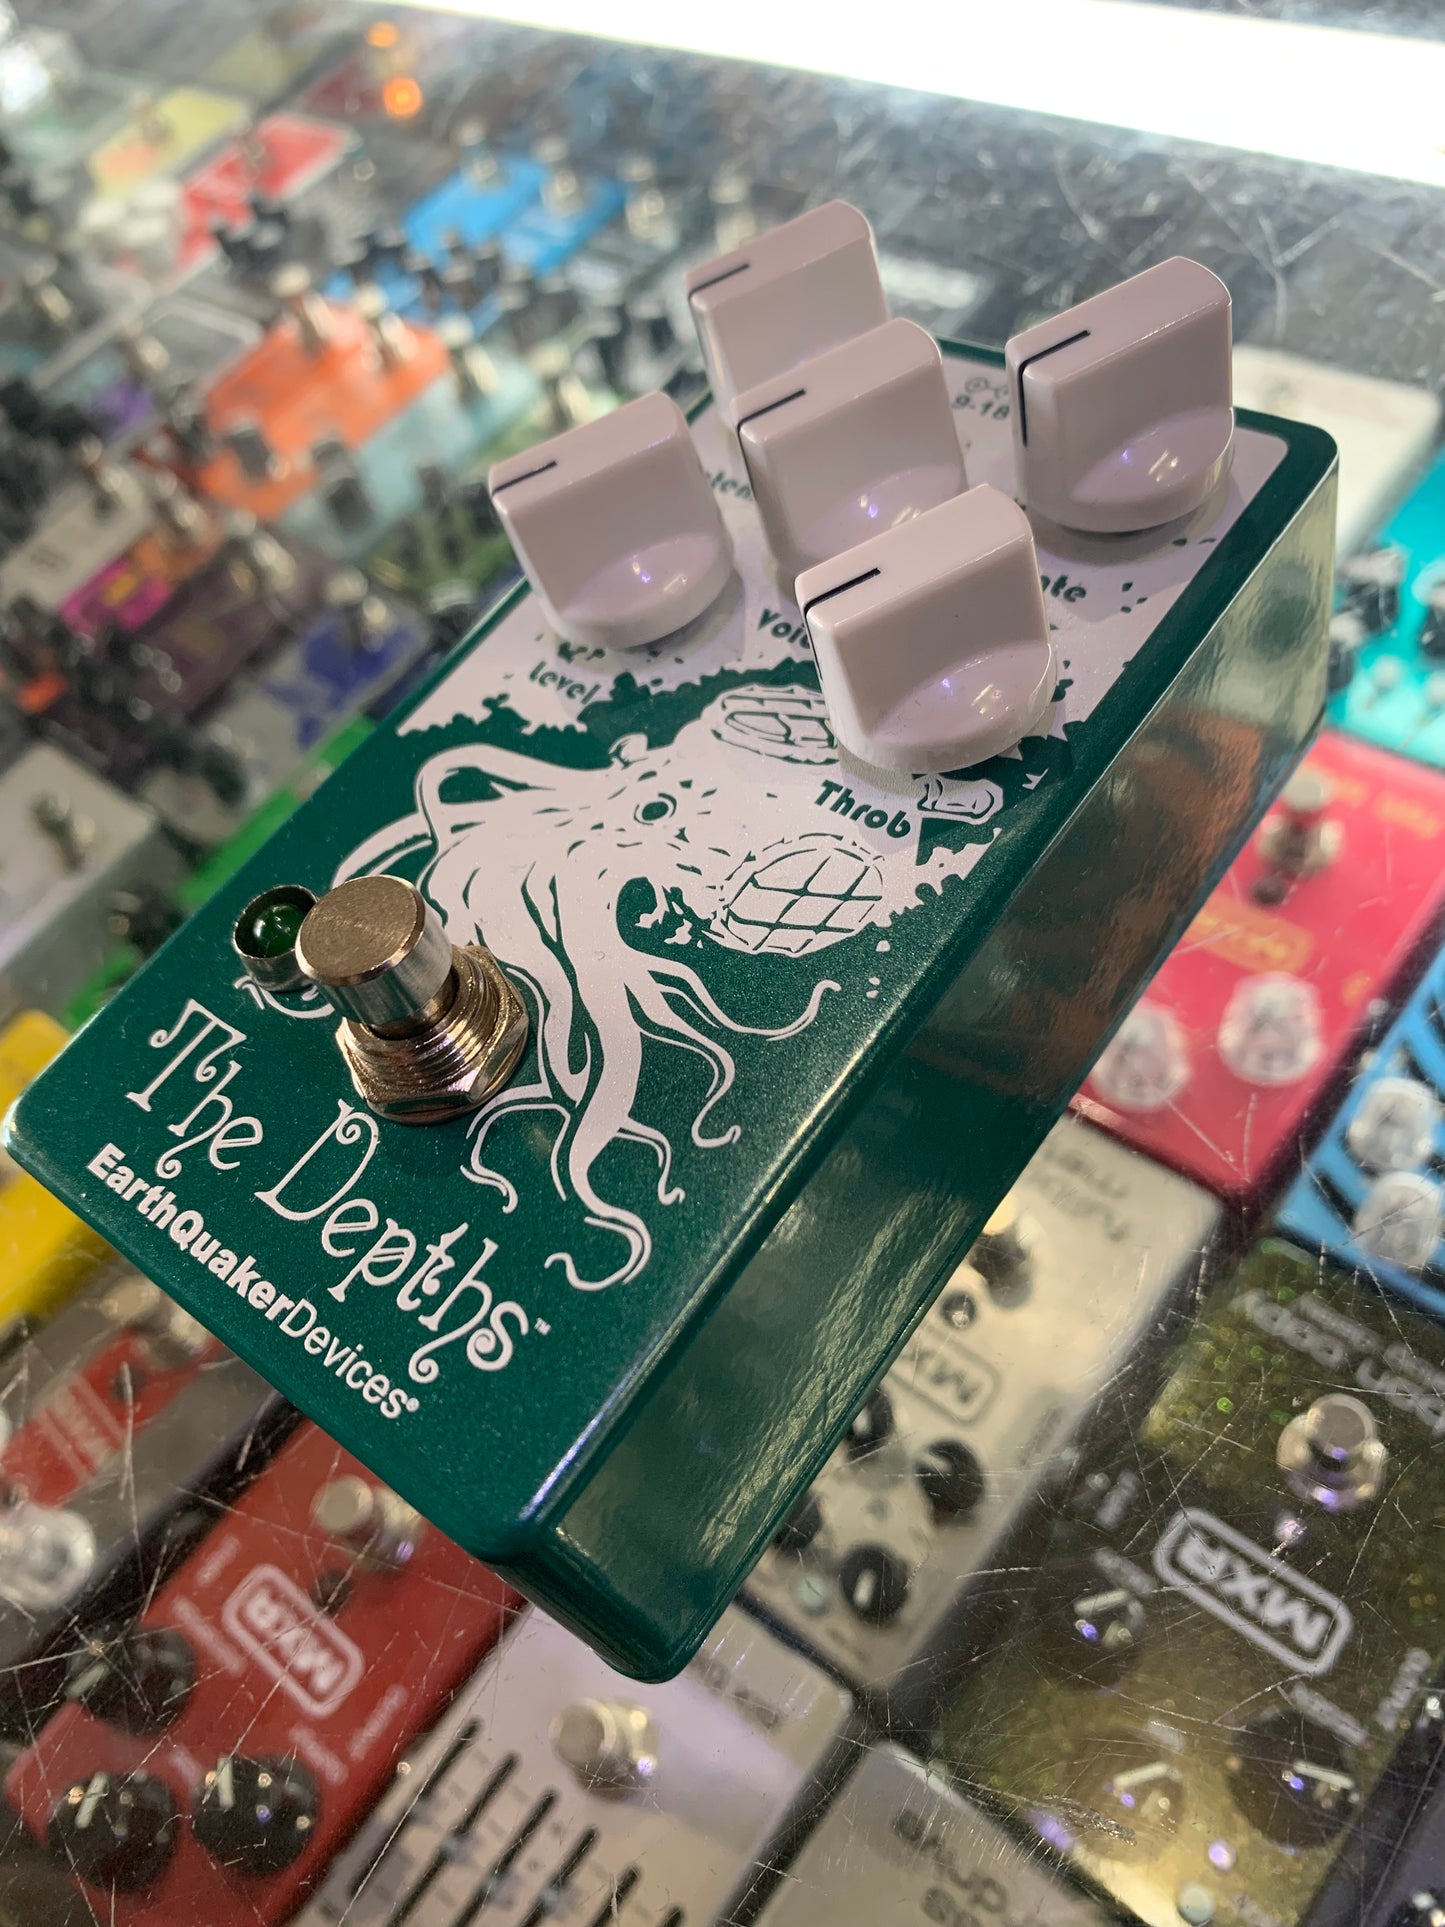 EQD The Depths - Analogue Optical Vibe Machine Pedal Pre-Loved